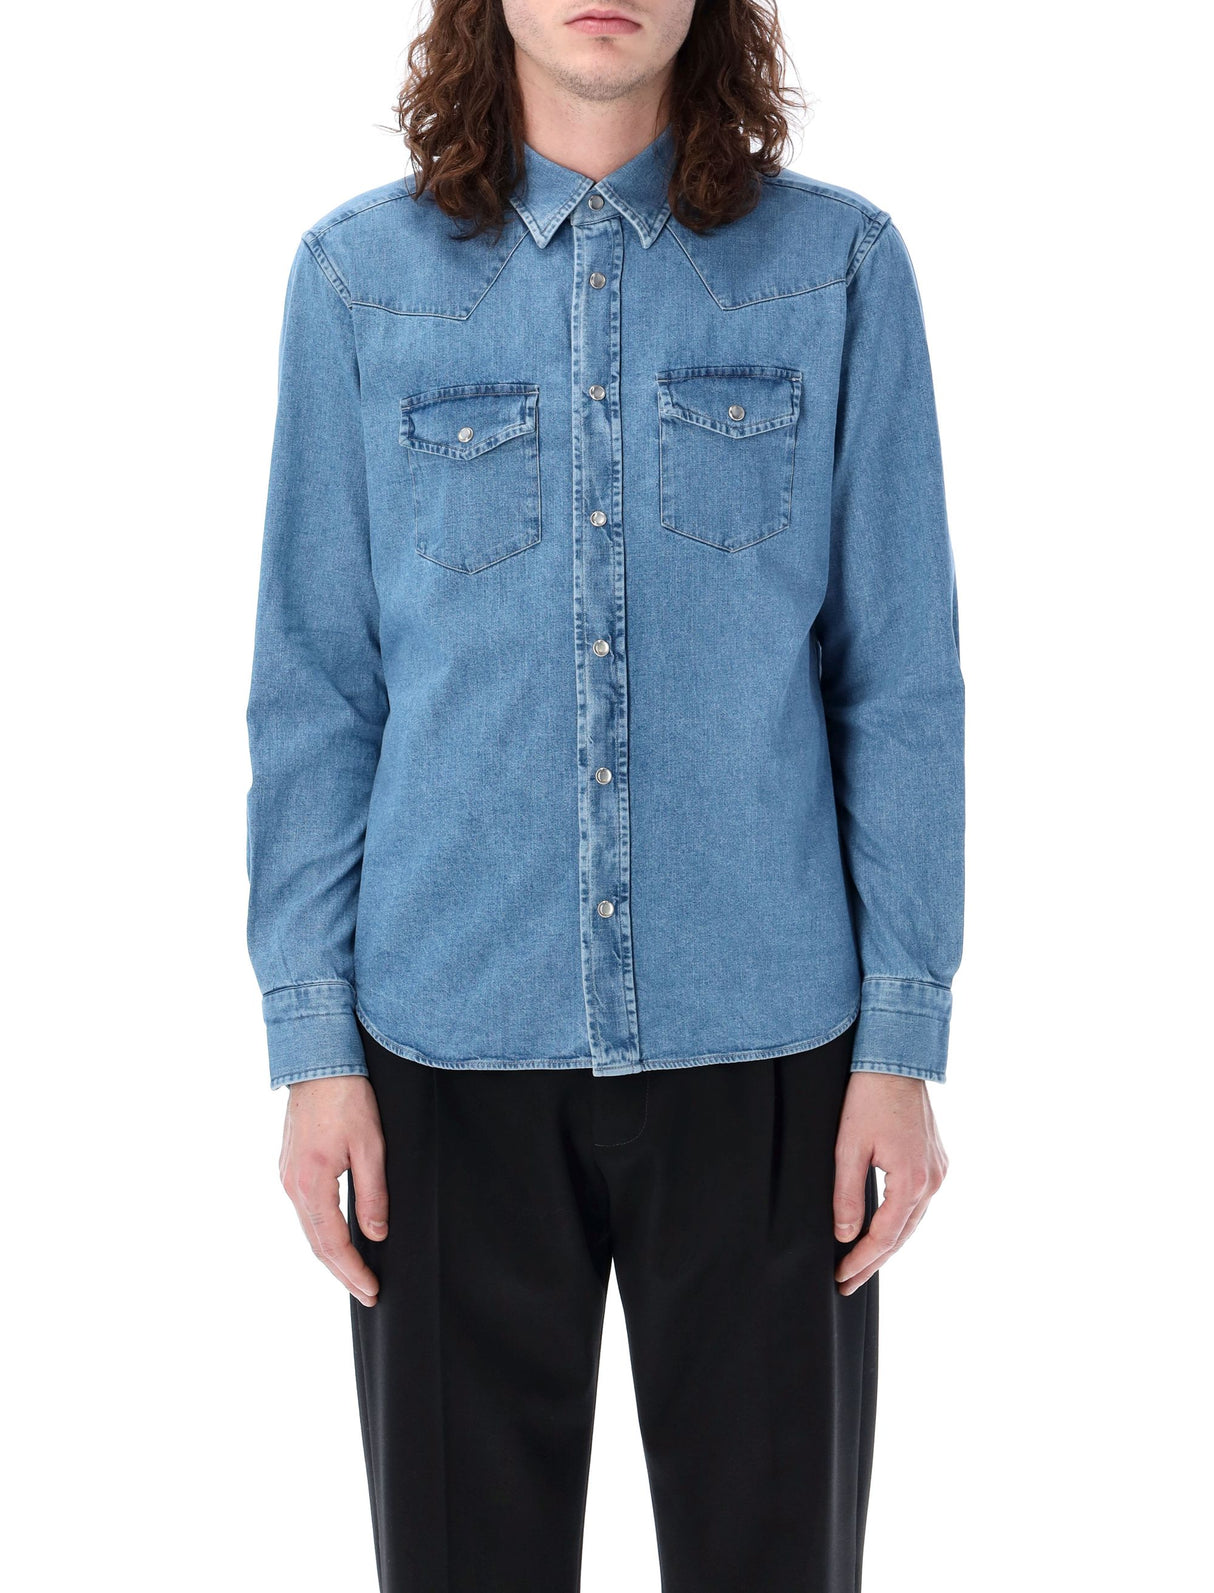 Men's Denim Casual Shirt - Classic Style by TOM FORD